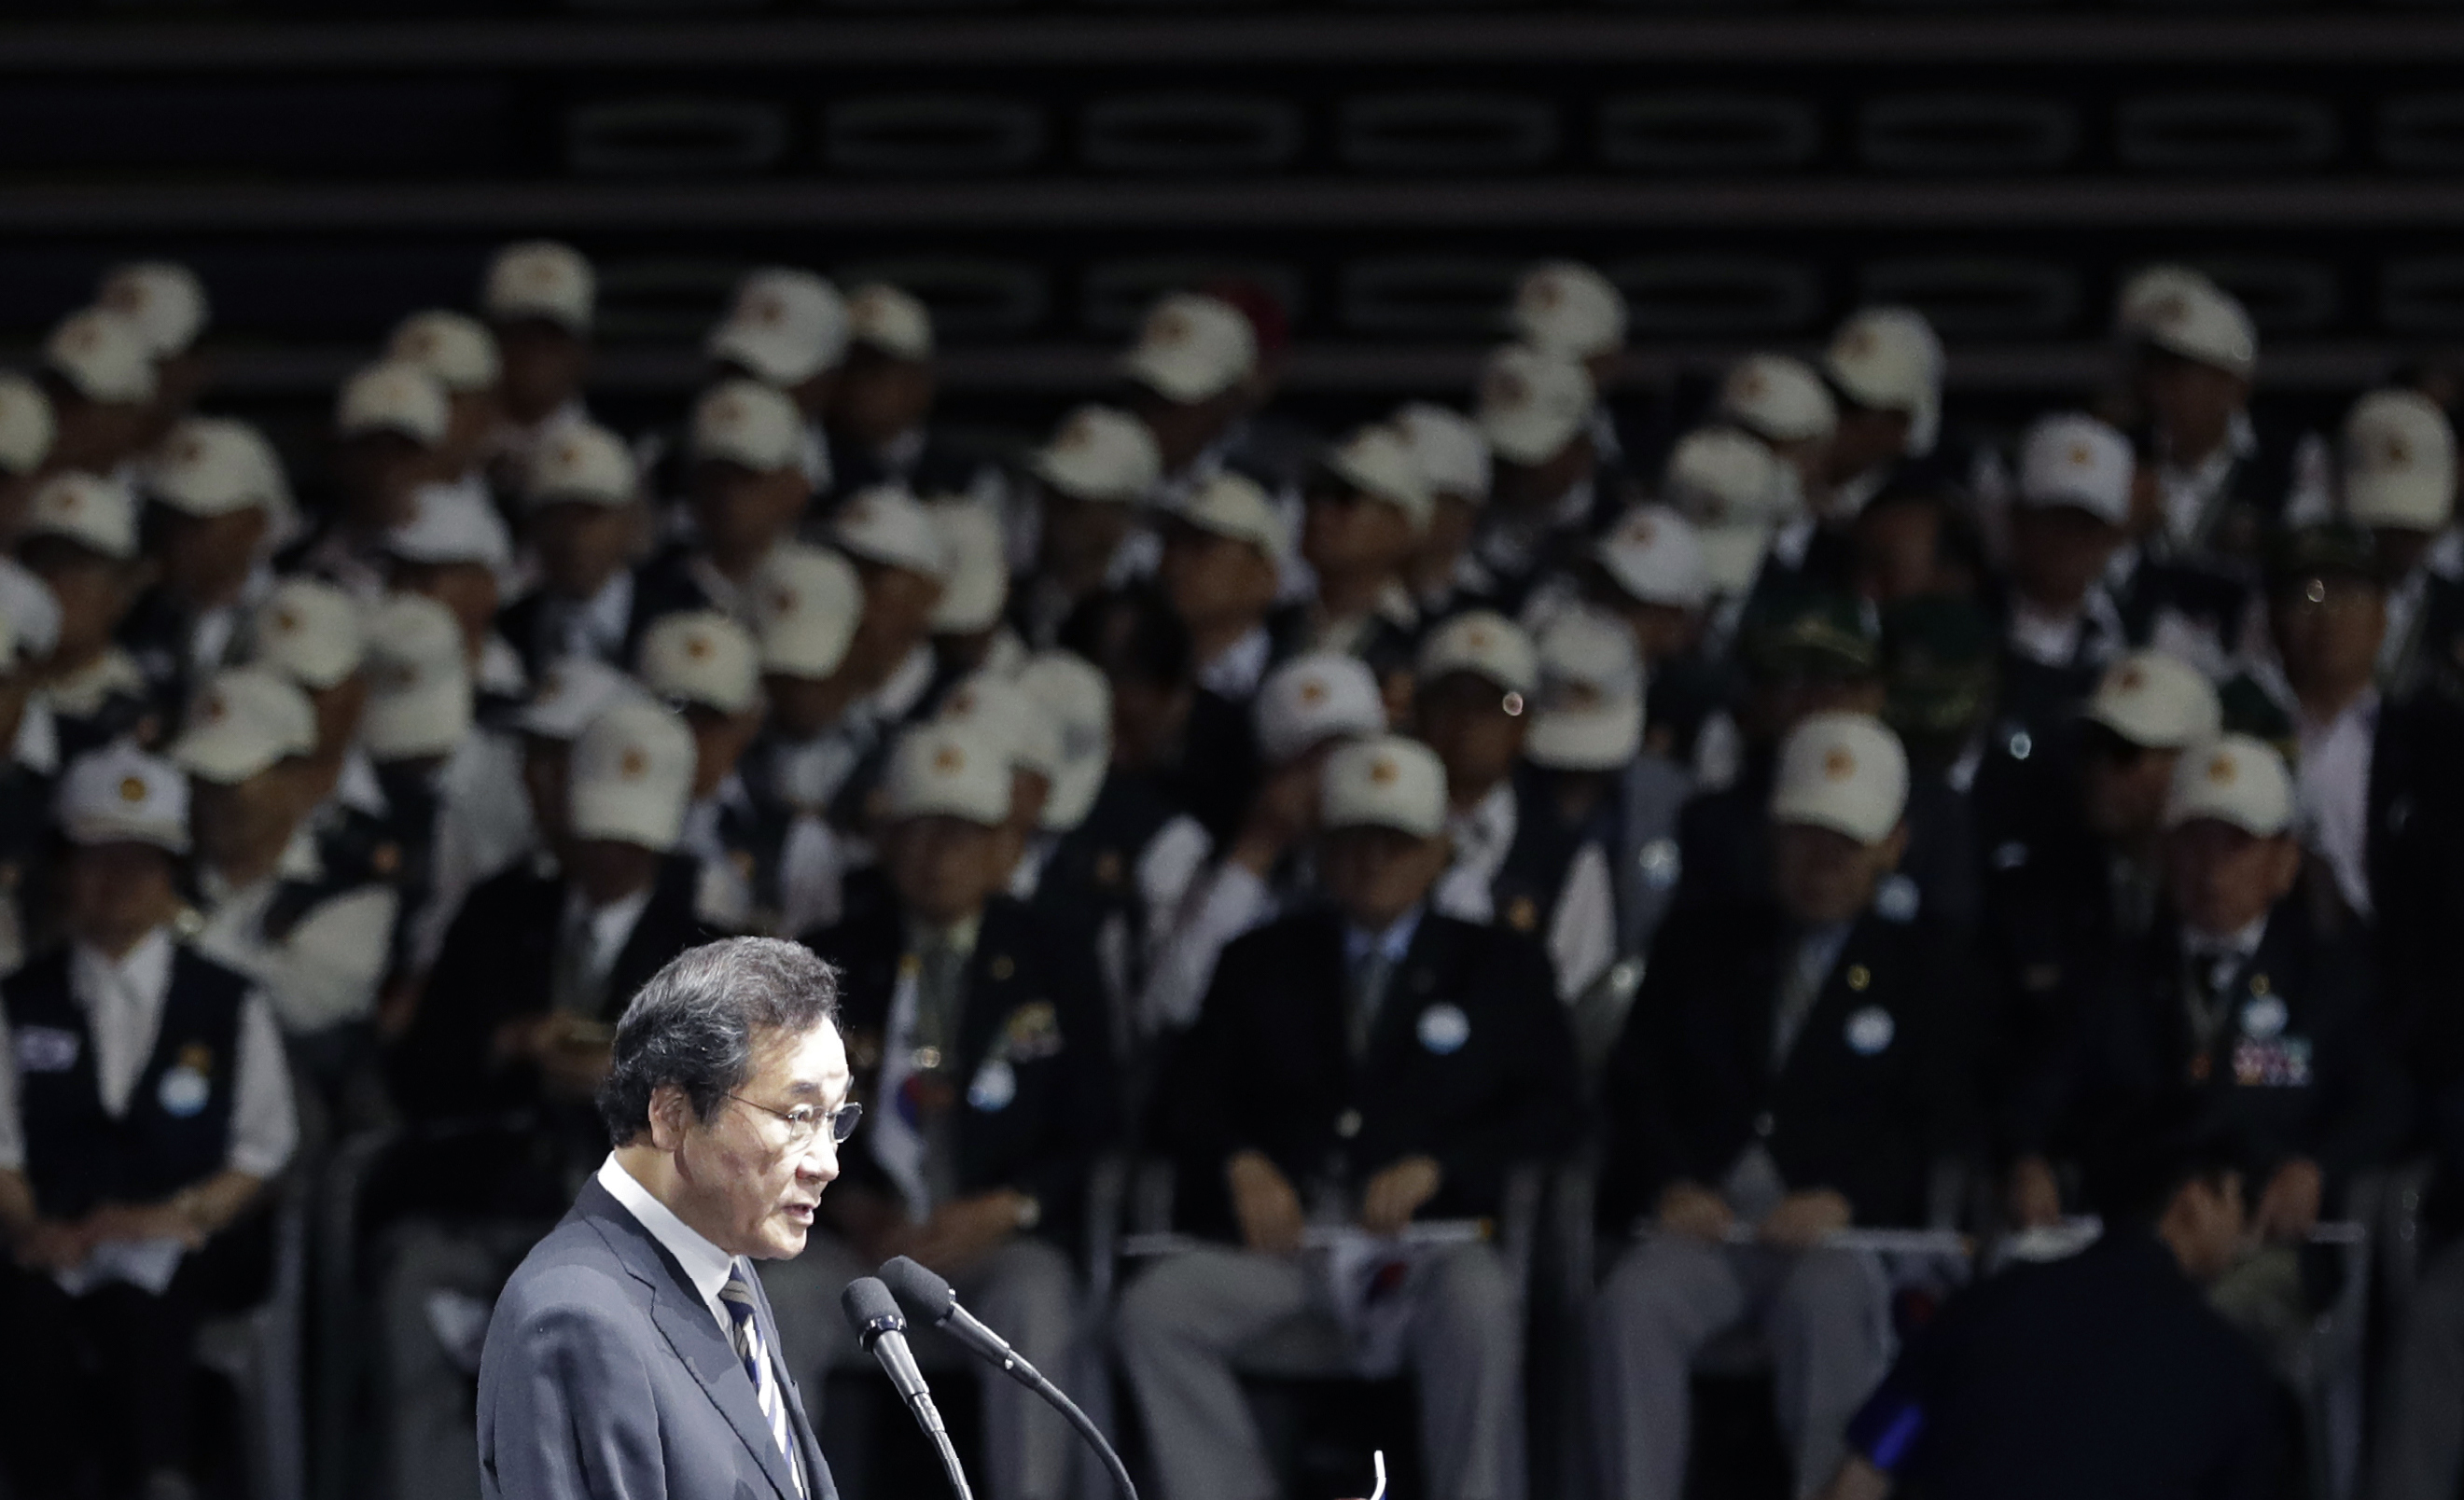 South Korean Prime Minister Lee Nak-yon delivers a speech during a ceremony to mark the 69th anniversary of the outbreak of the Korean War in Seoul, South Korea, Tuesday, June 25, 2019. South Korea and North Korea fought a devastating three-year war in the early 1950s that ended with an armistice, not a peace treaty. (AP Photo/Lee Jin-man)